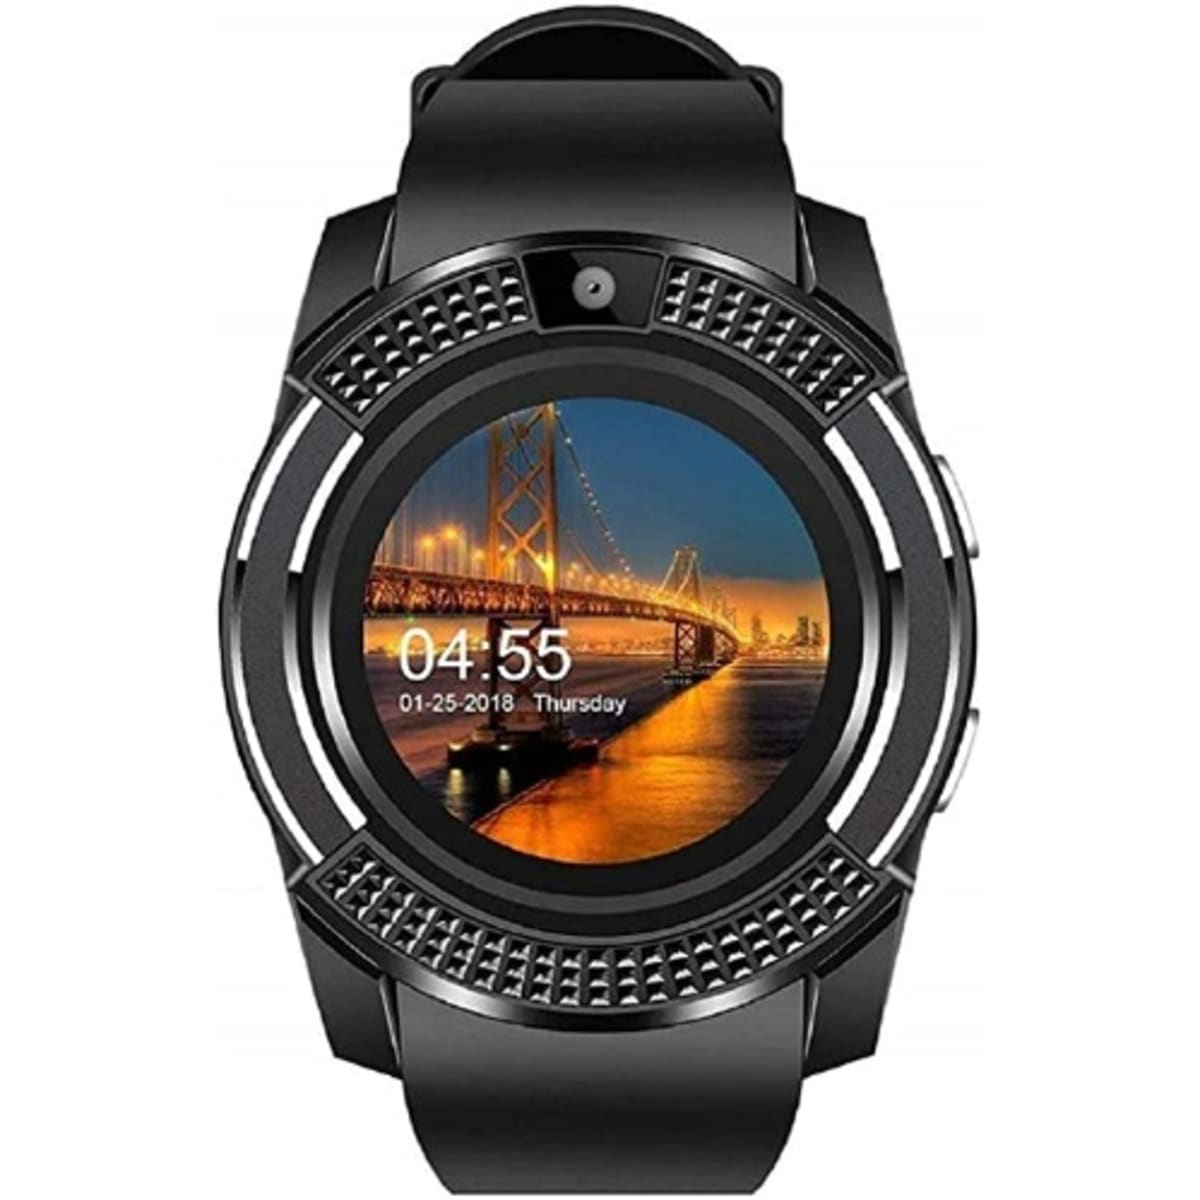 Smartwatch With Sim And Memory Card Slot